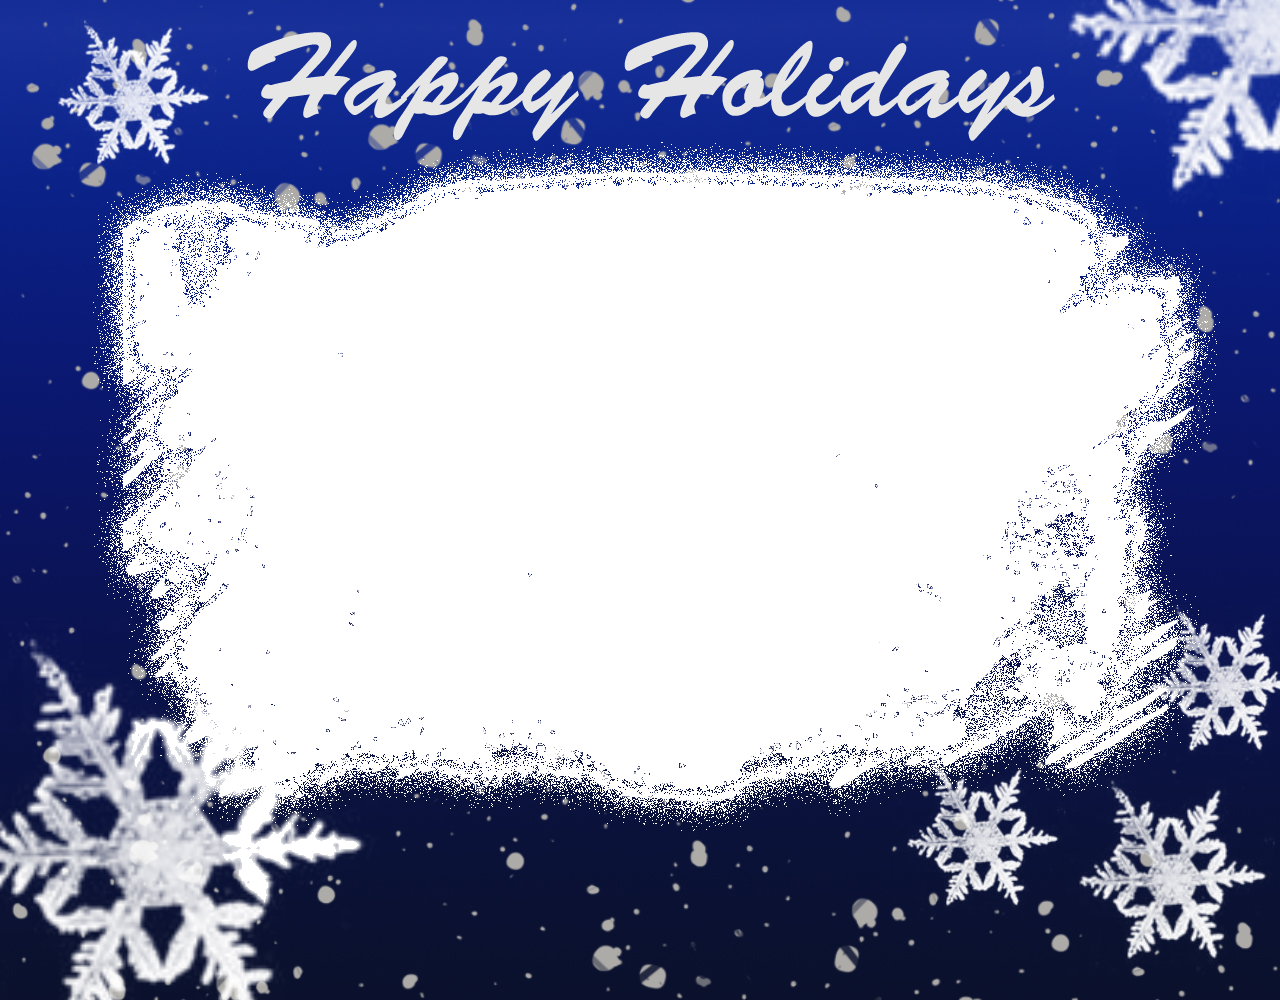 Blue Photos Frame Christmas Download HQ PNG Image